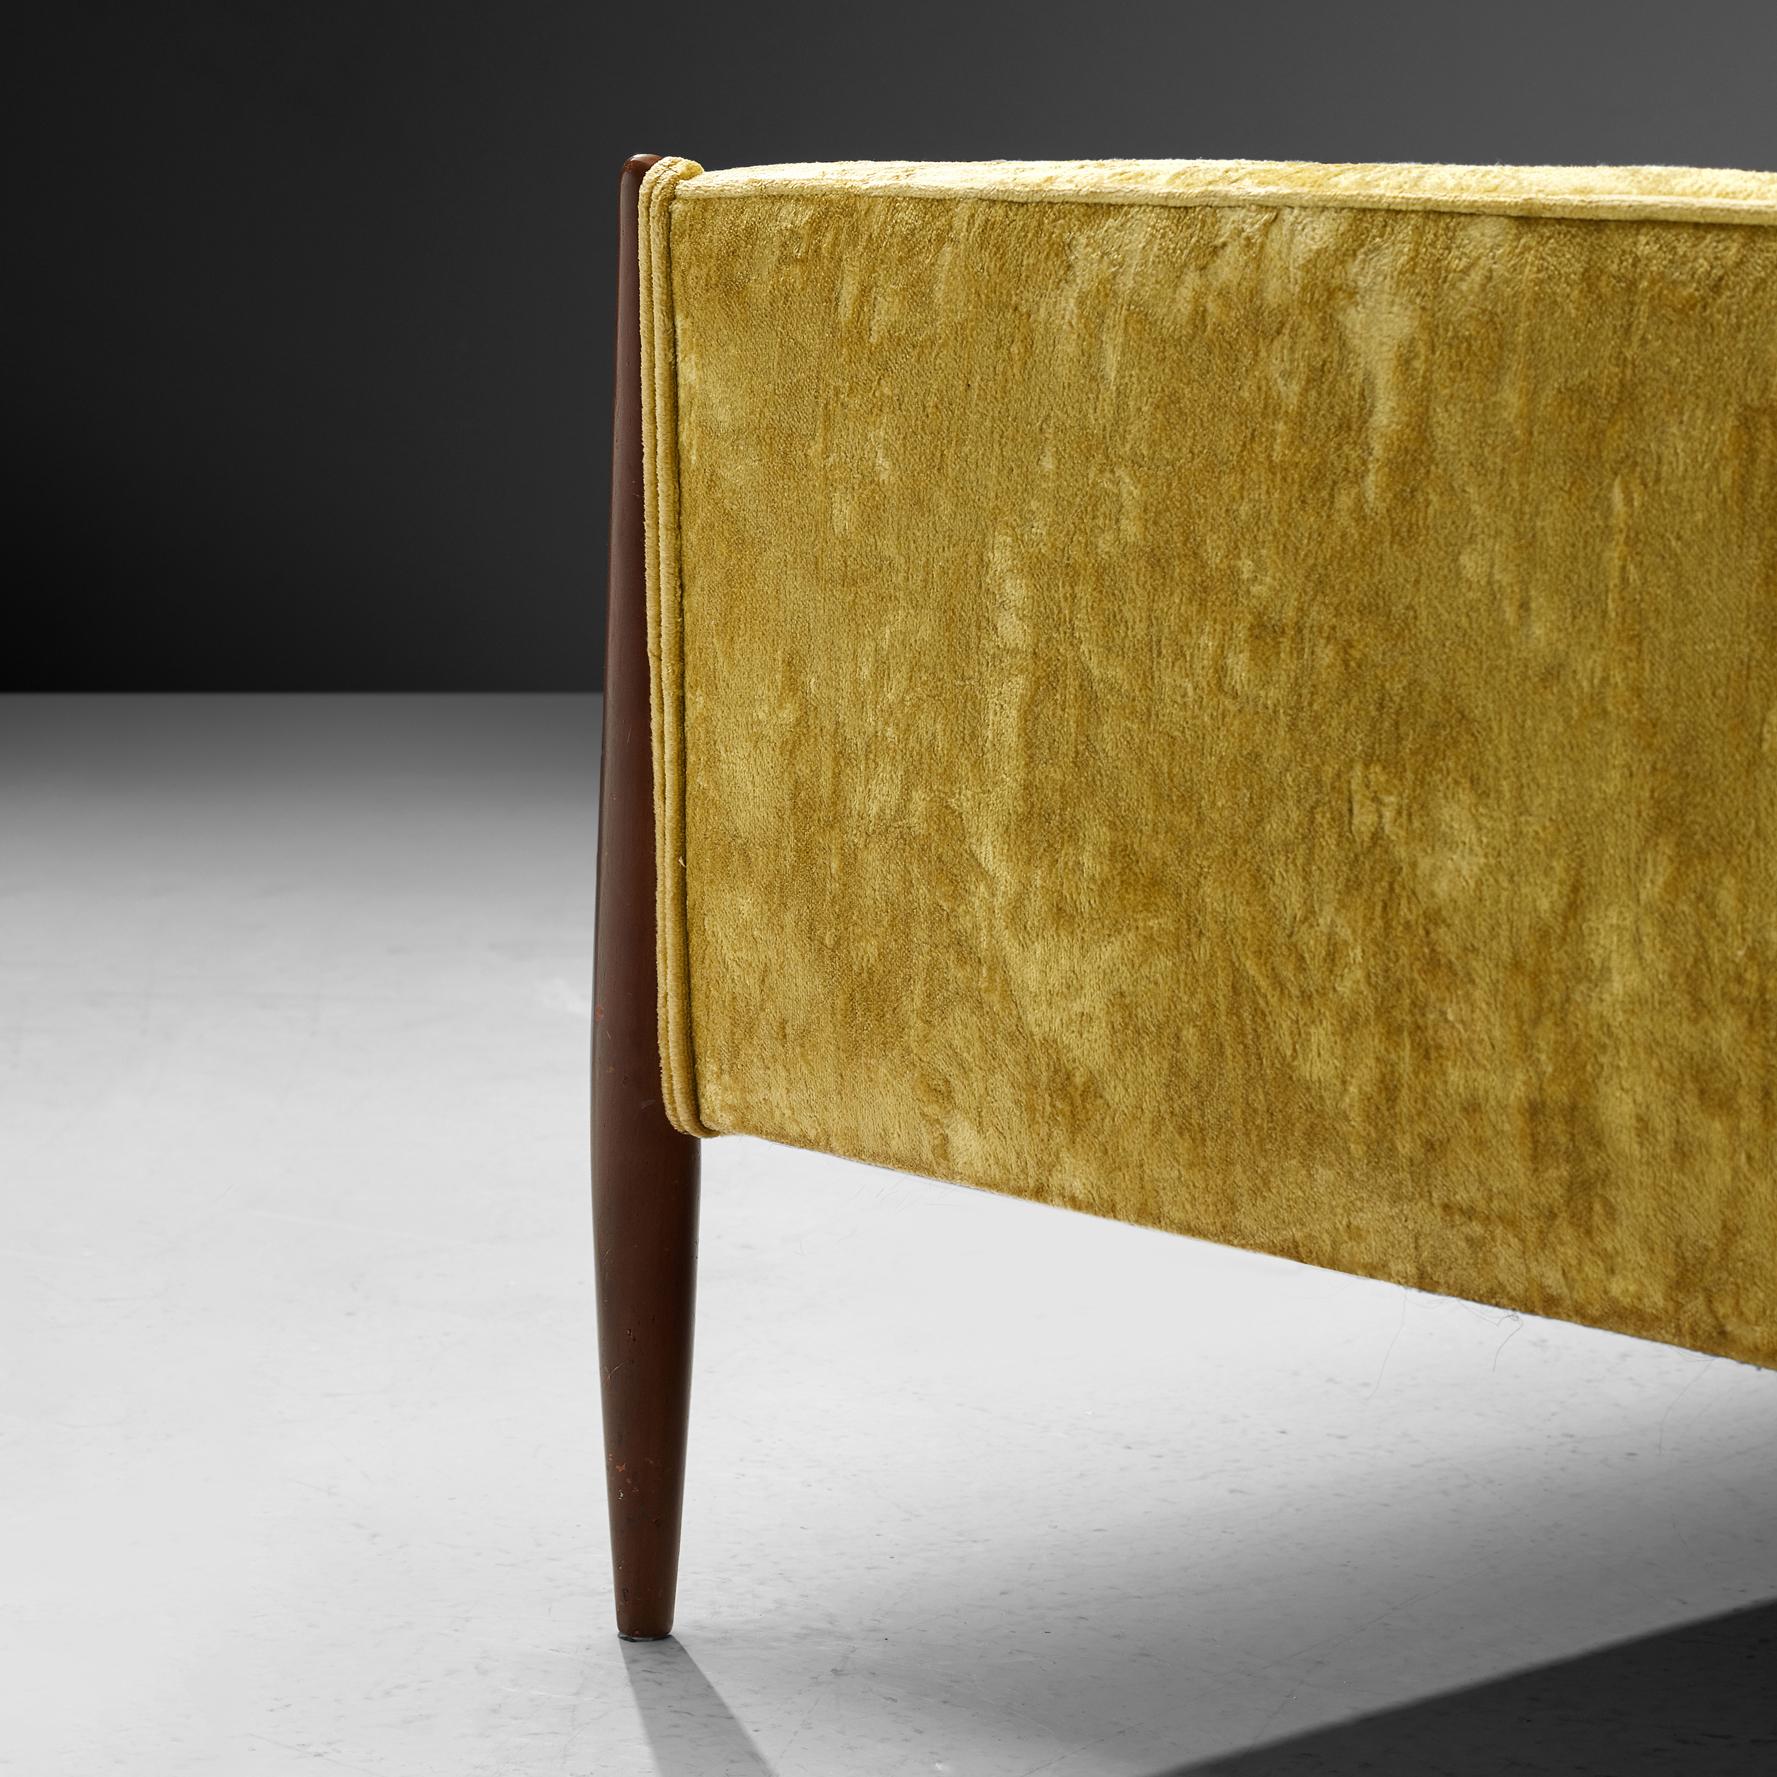 Jules Heumann for Metropolitan Furniture, sofa, upholstery and walnut, United States, 1960s.

A Classic midcentury three-seat sofa by the American designer Jules Heumann for Metropolitan Furniture. The tapered legs give the sofa an elegant lift.